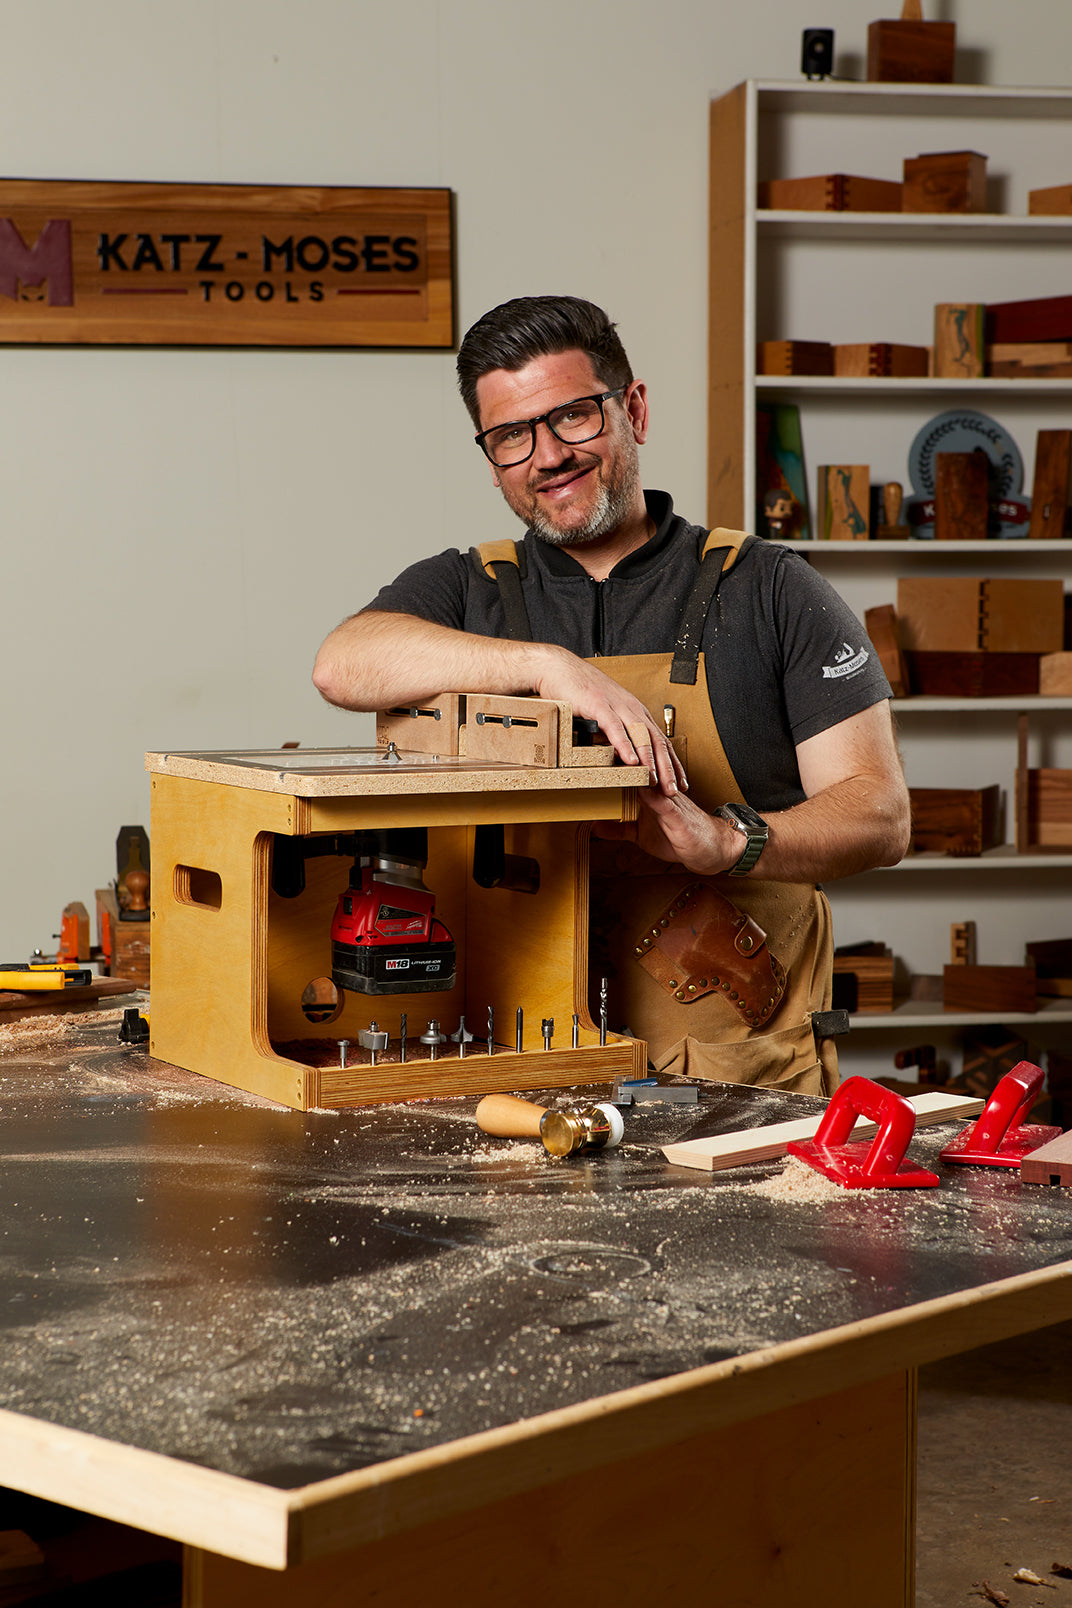 Table Saw Router Table Packages